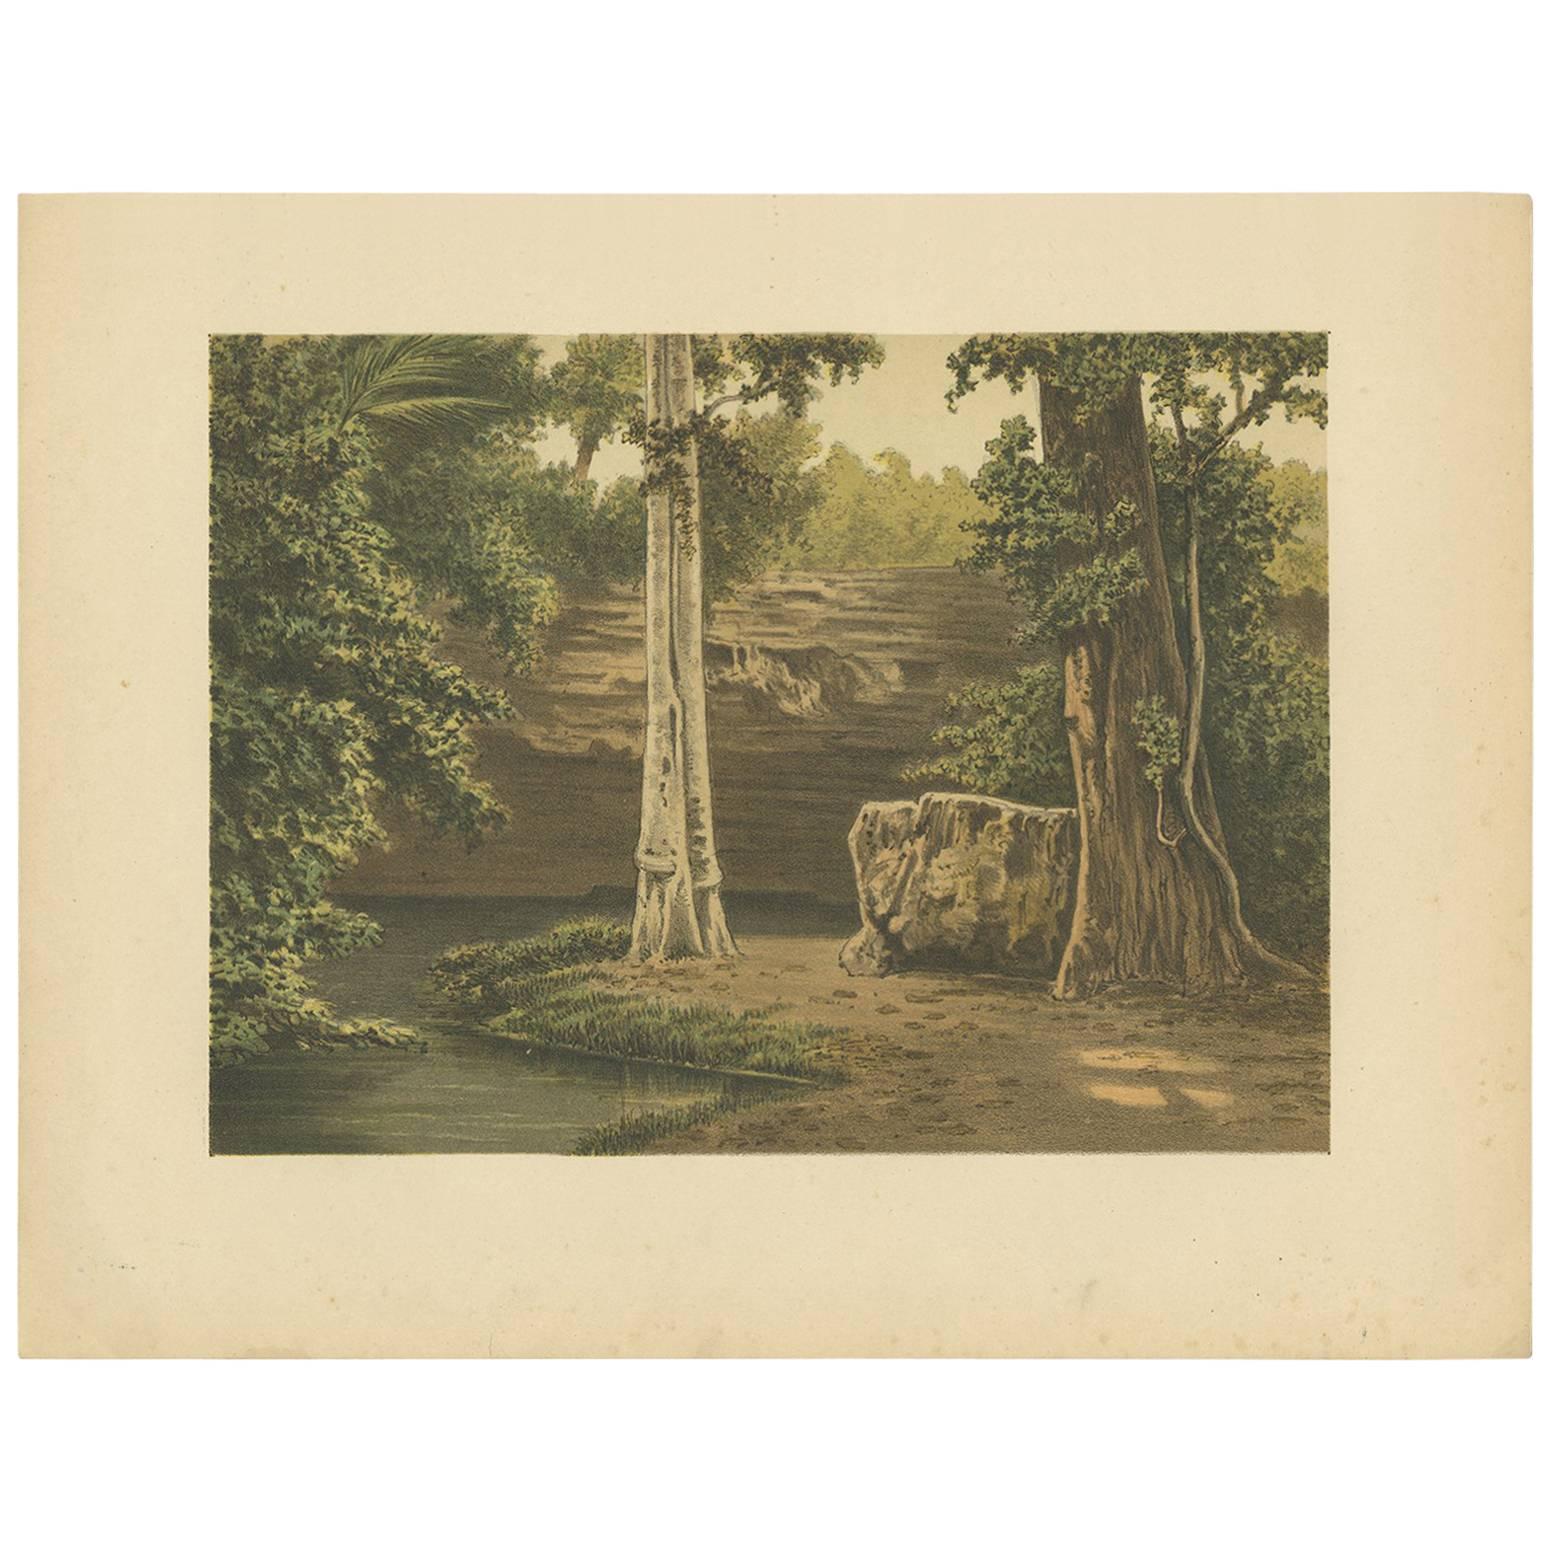 Antique Print of the Djati Forest by M.T.H. Perelaer, 1888